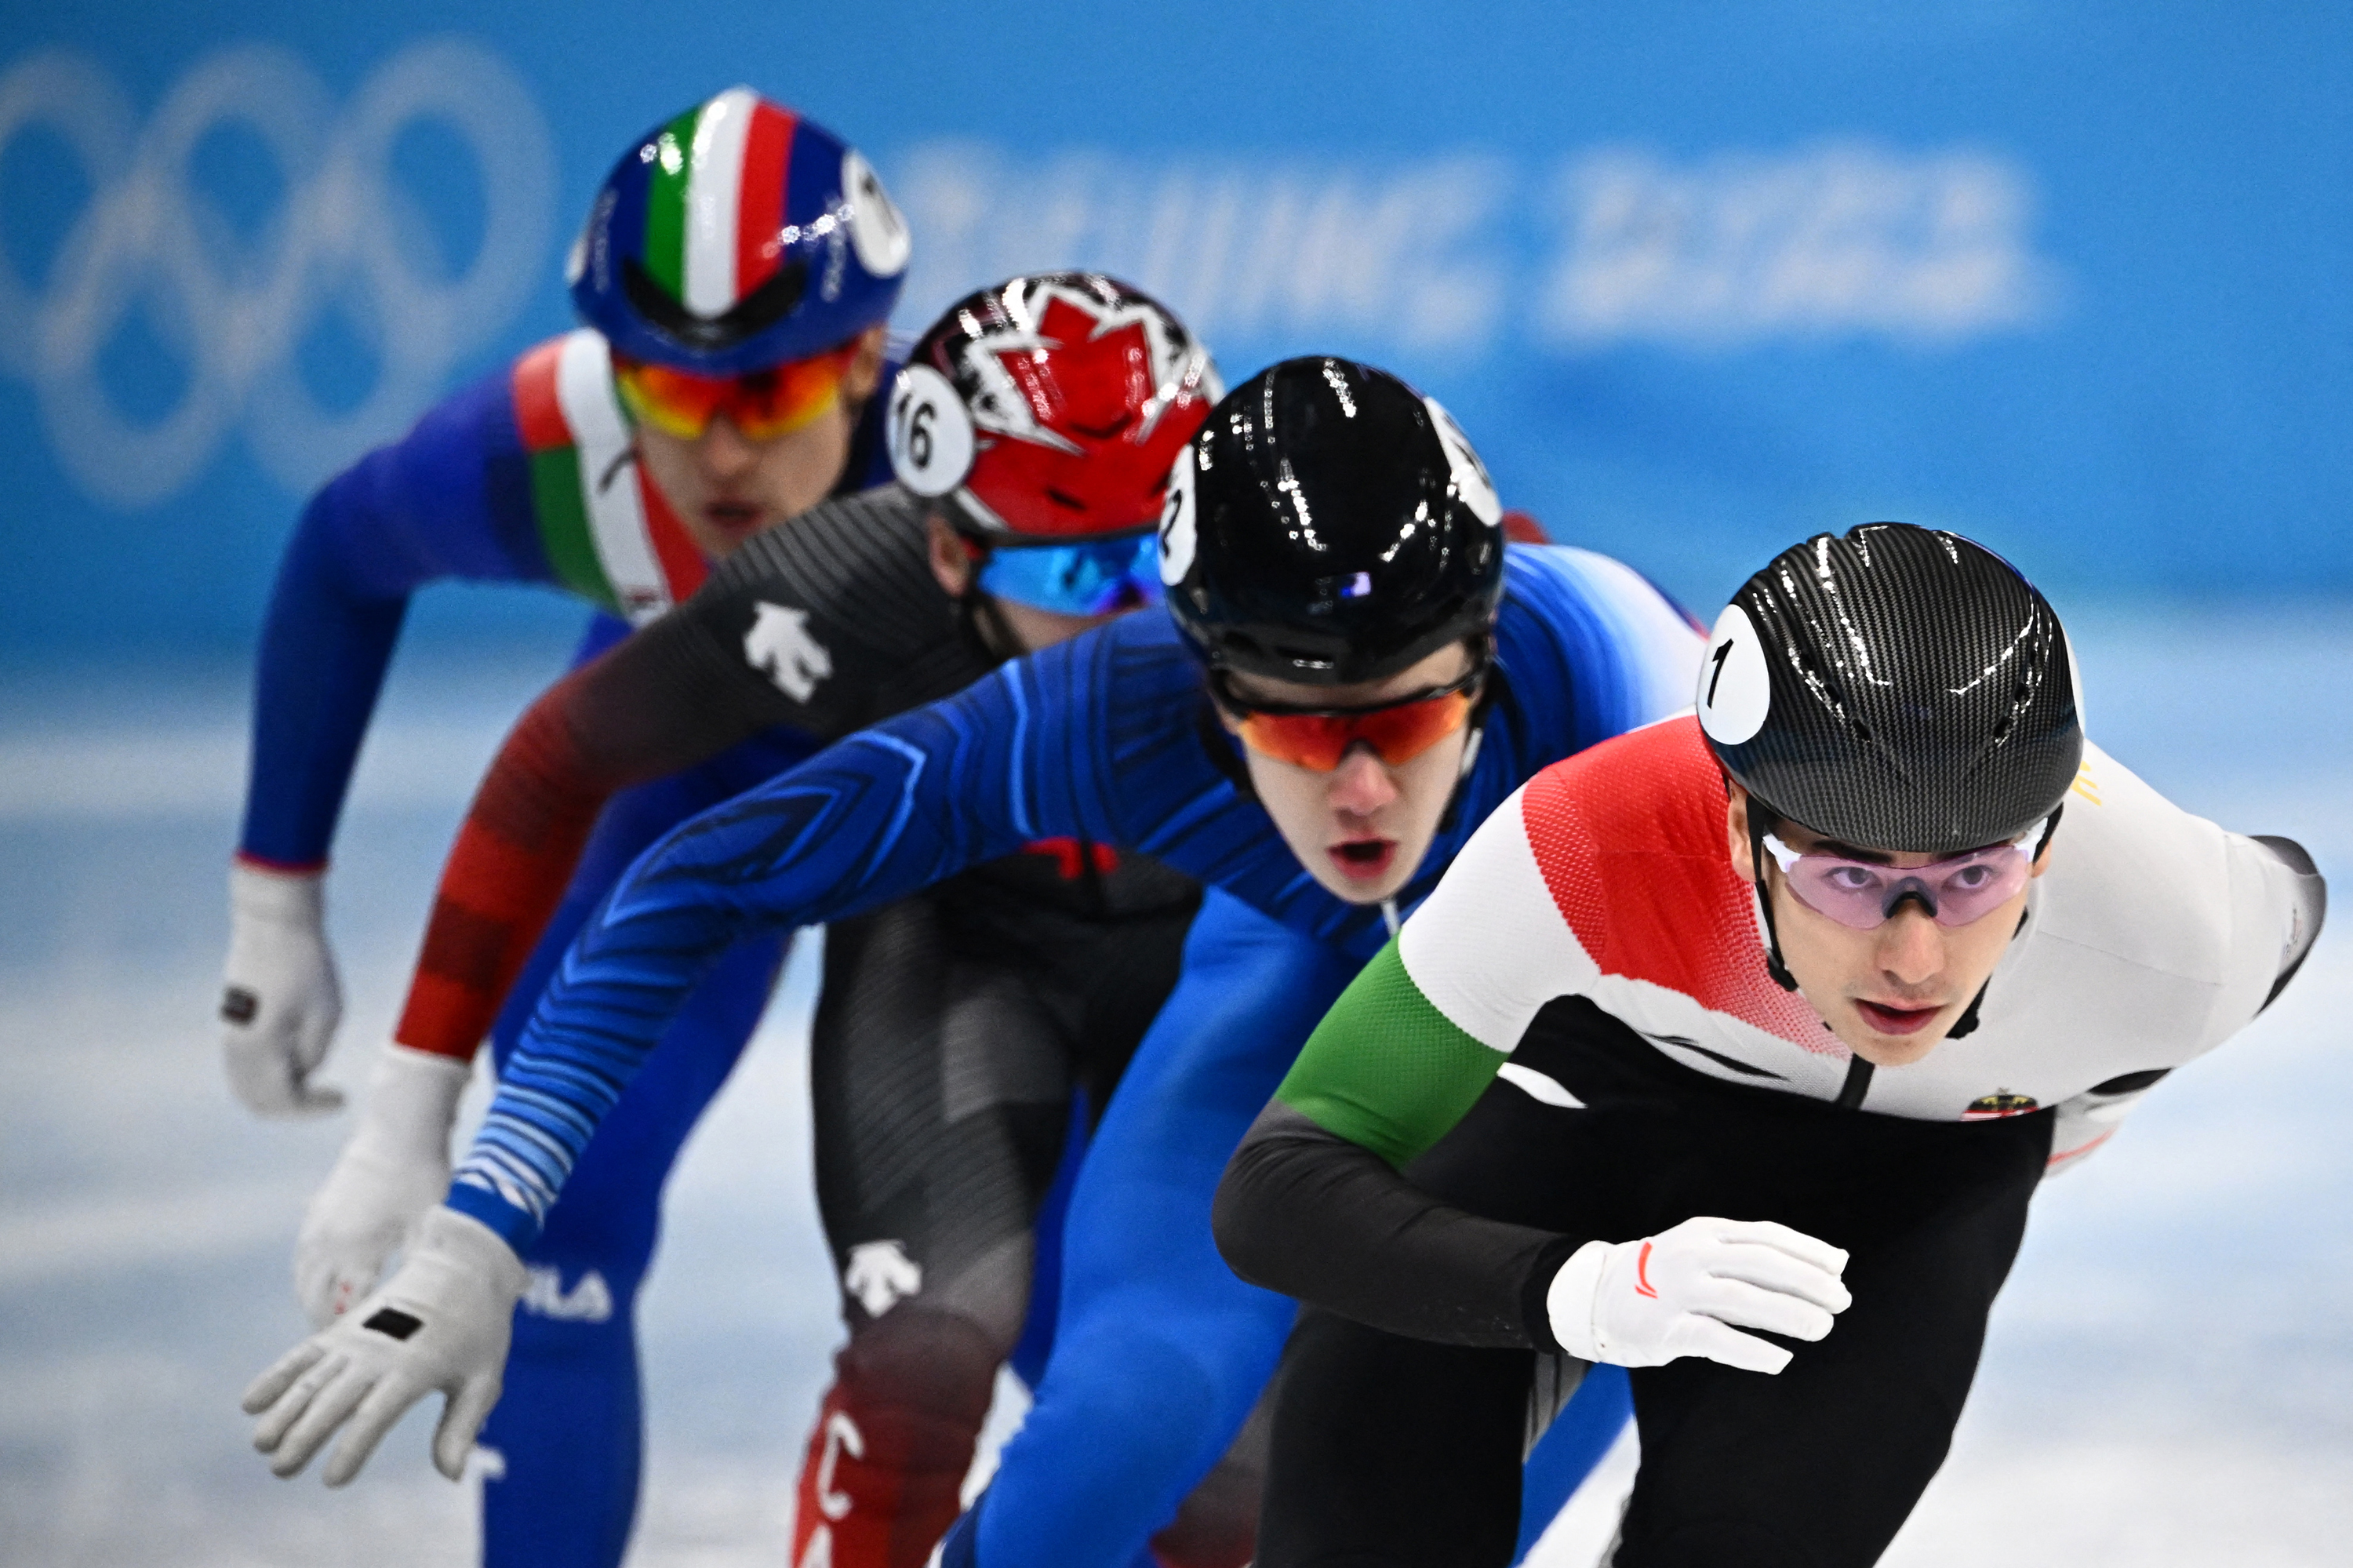 Hungary's Shaoang Liu leads in the men's 500m short track speed skating event on February 13. 